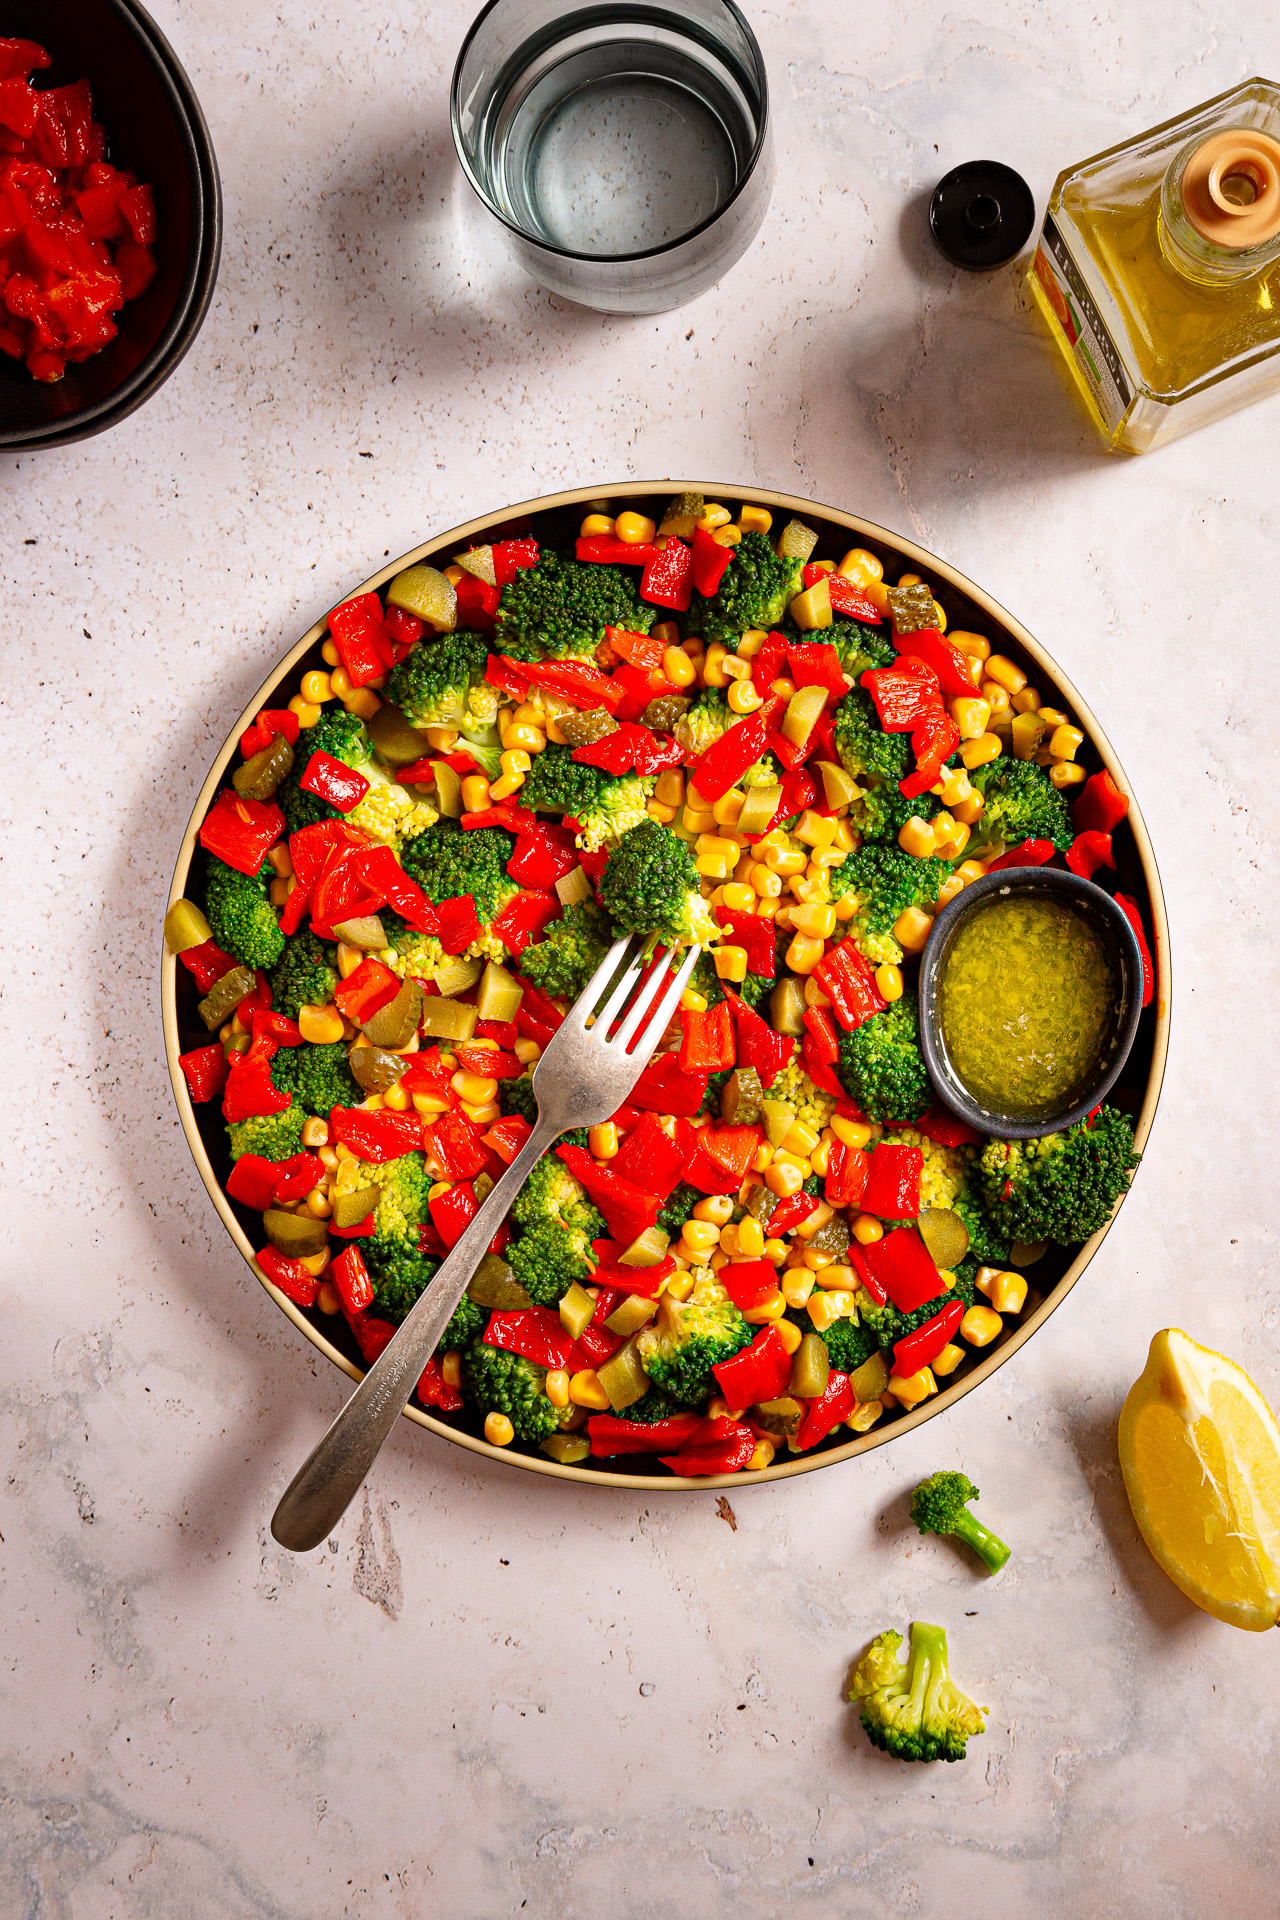 BROCCOLI SALAD WITH ROASTED PEPPERS AND SWEETCORN